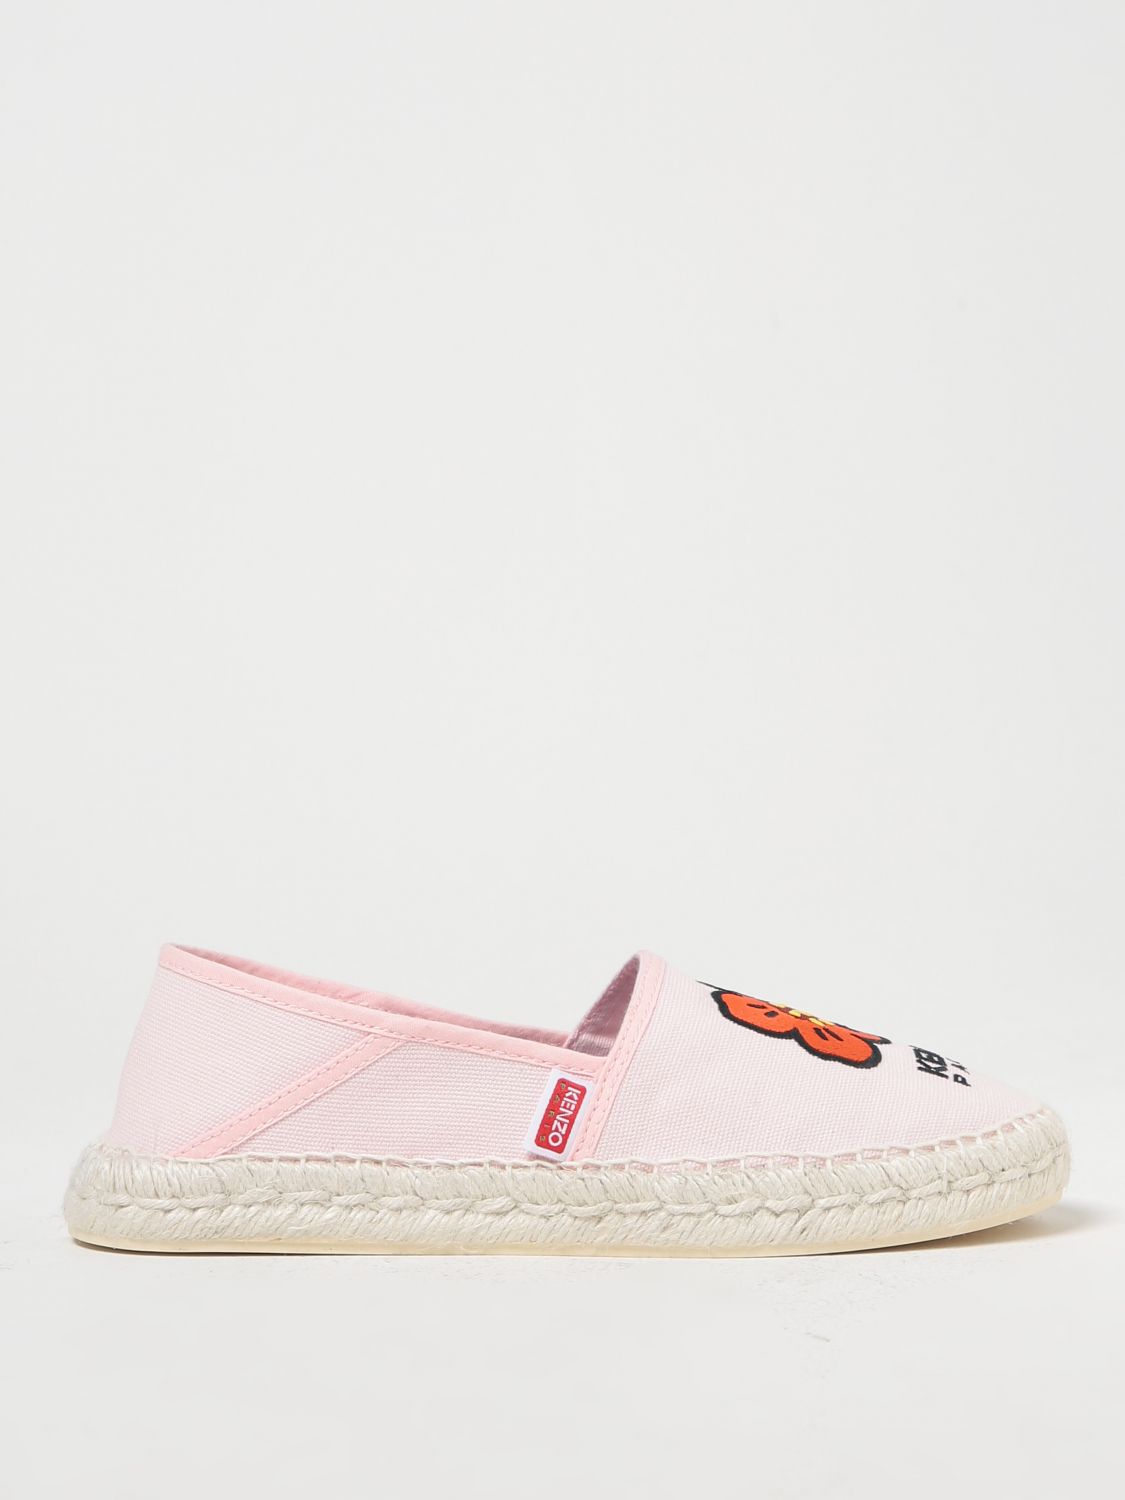 KENZO FLOWER ESPADRILLES IN CANVAS WITH EMBROIDERED LOGO,E74016010